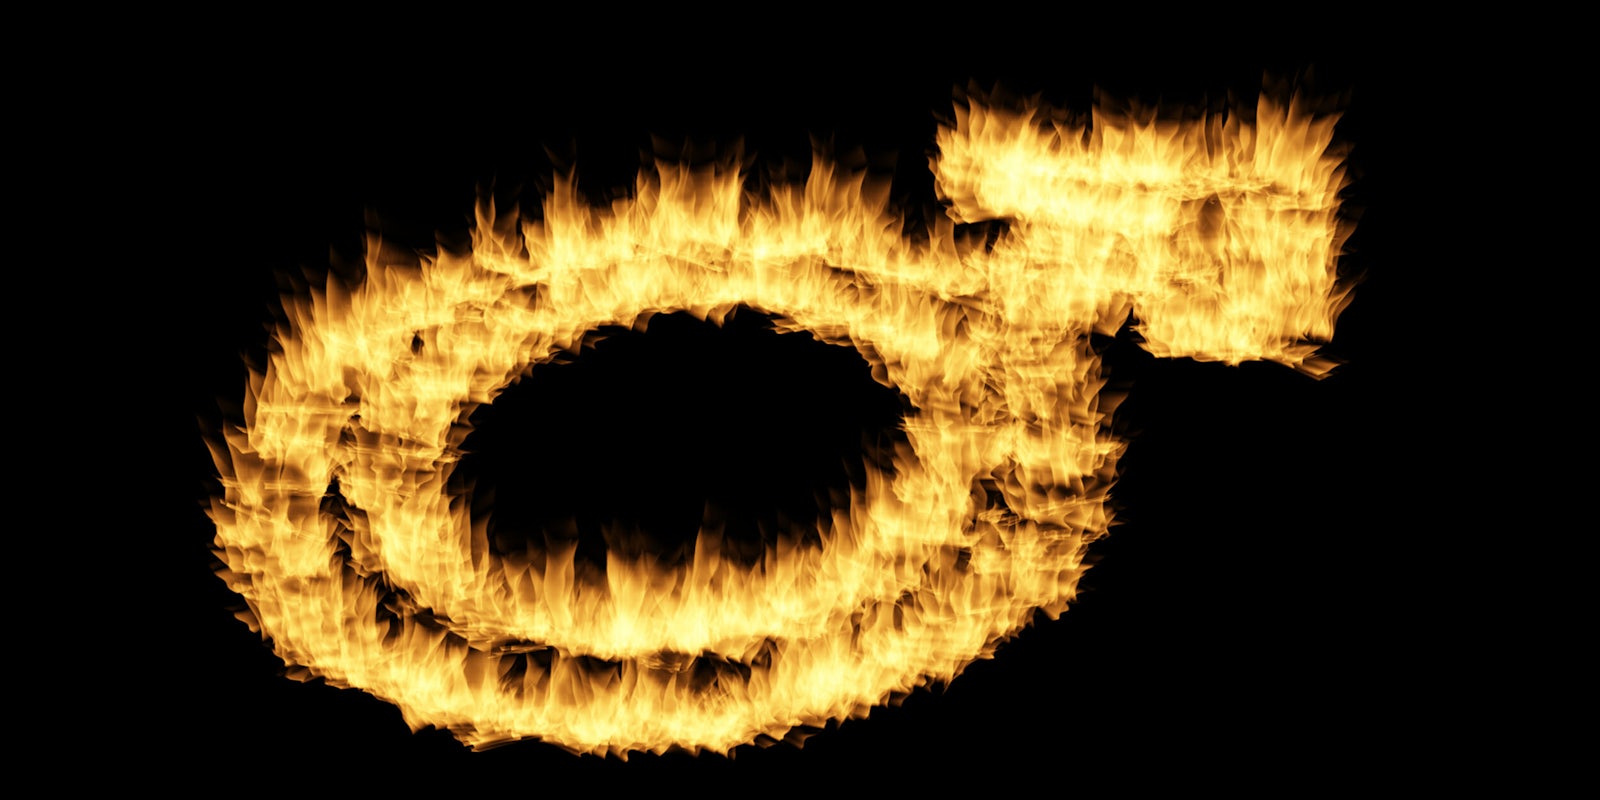 Male symbol made of fire